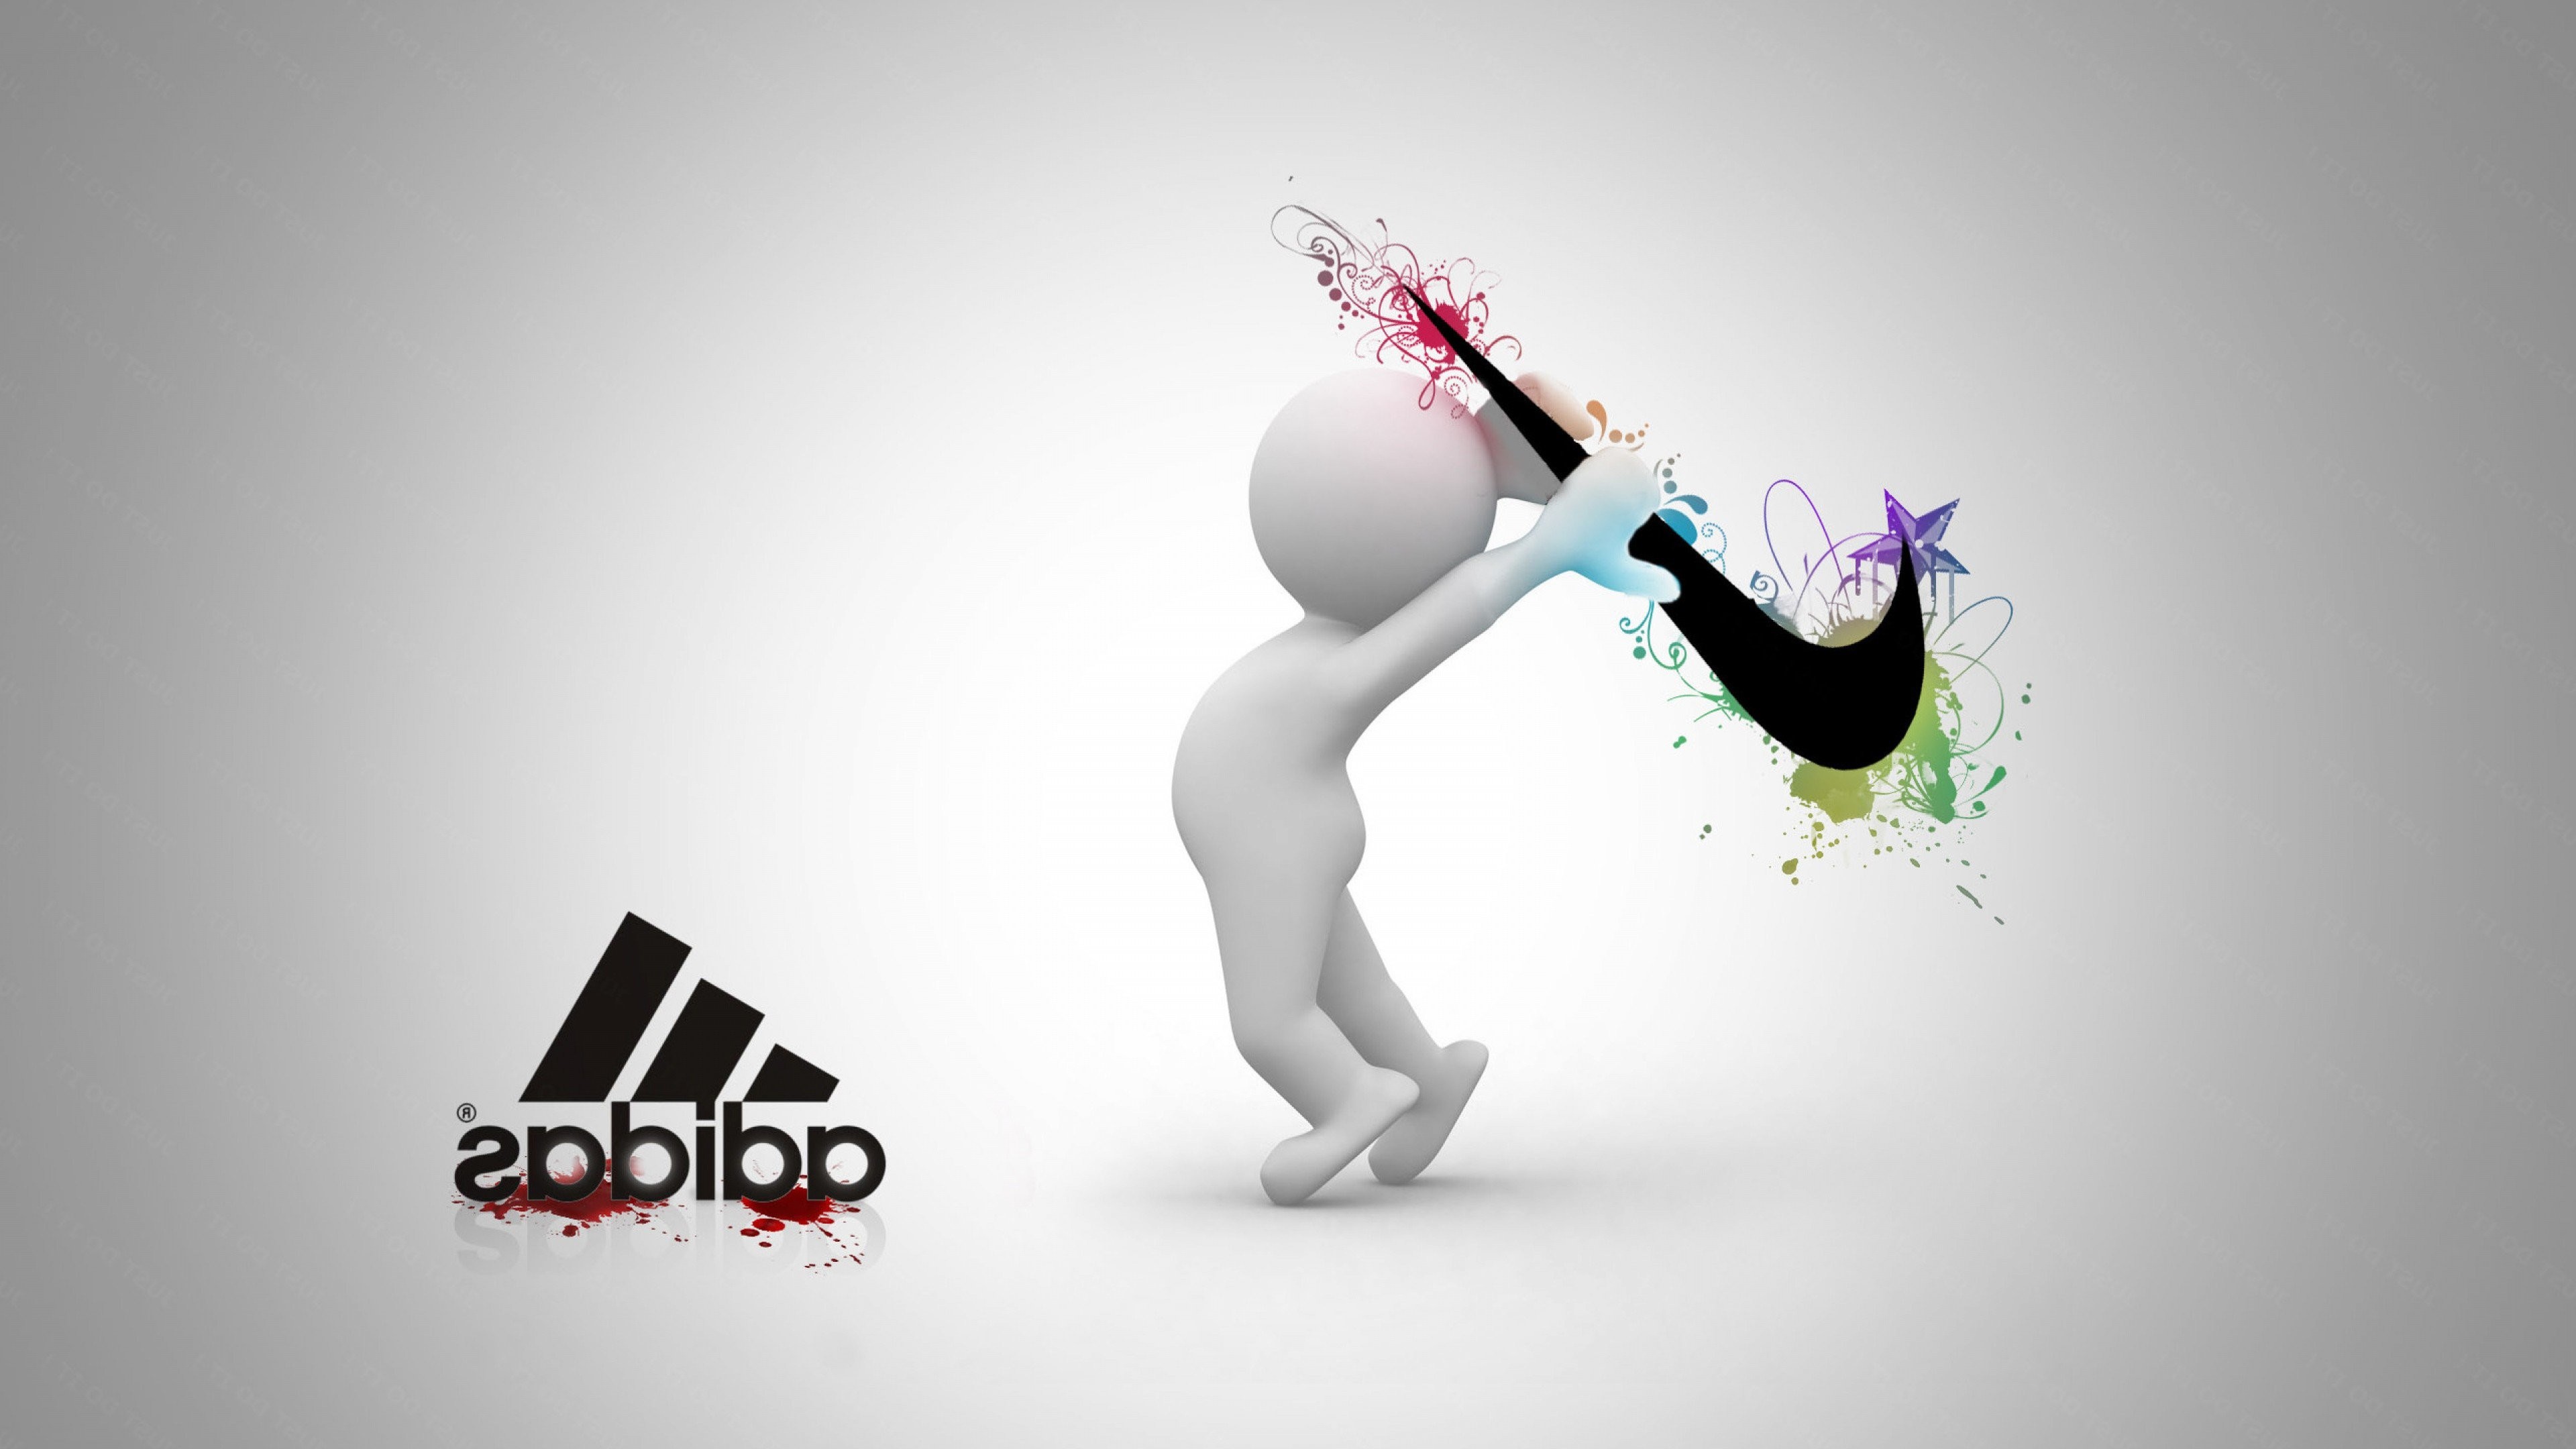 Nike Vs Adidas Wallpapers Hd Desktop Wallpapers Hd High Definition Windows 10 Mac Apple Colourful Images Backgrounds Free 3840 2160 Wallpaper Hd 3840x2160